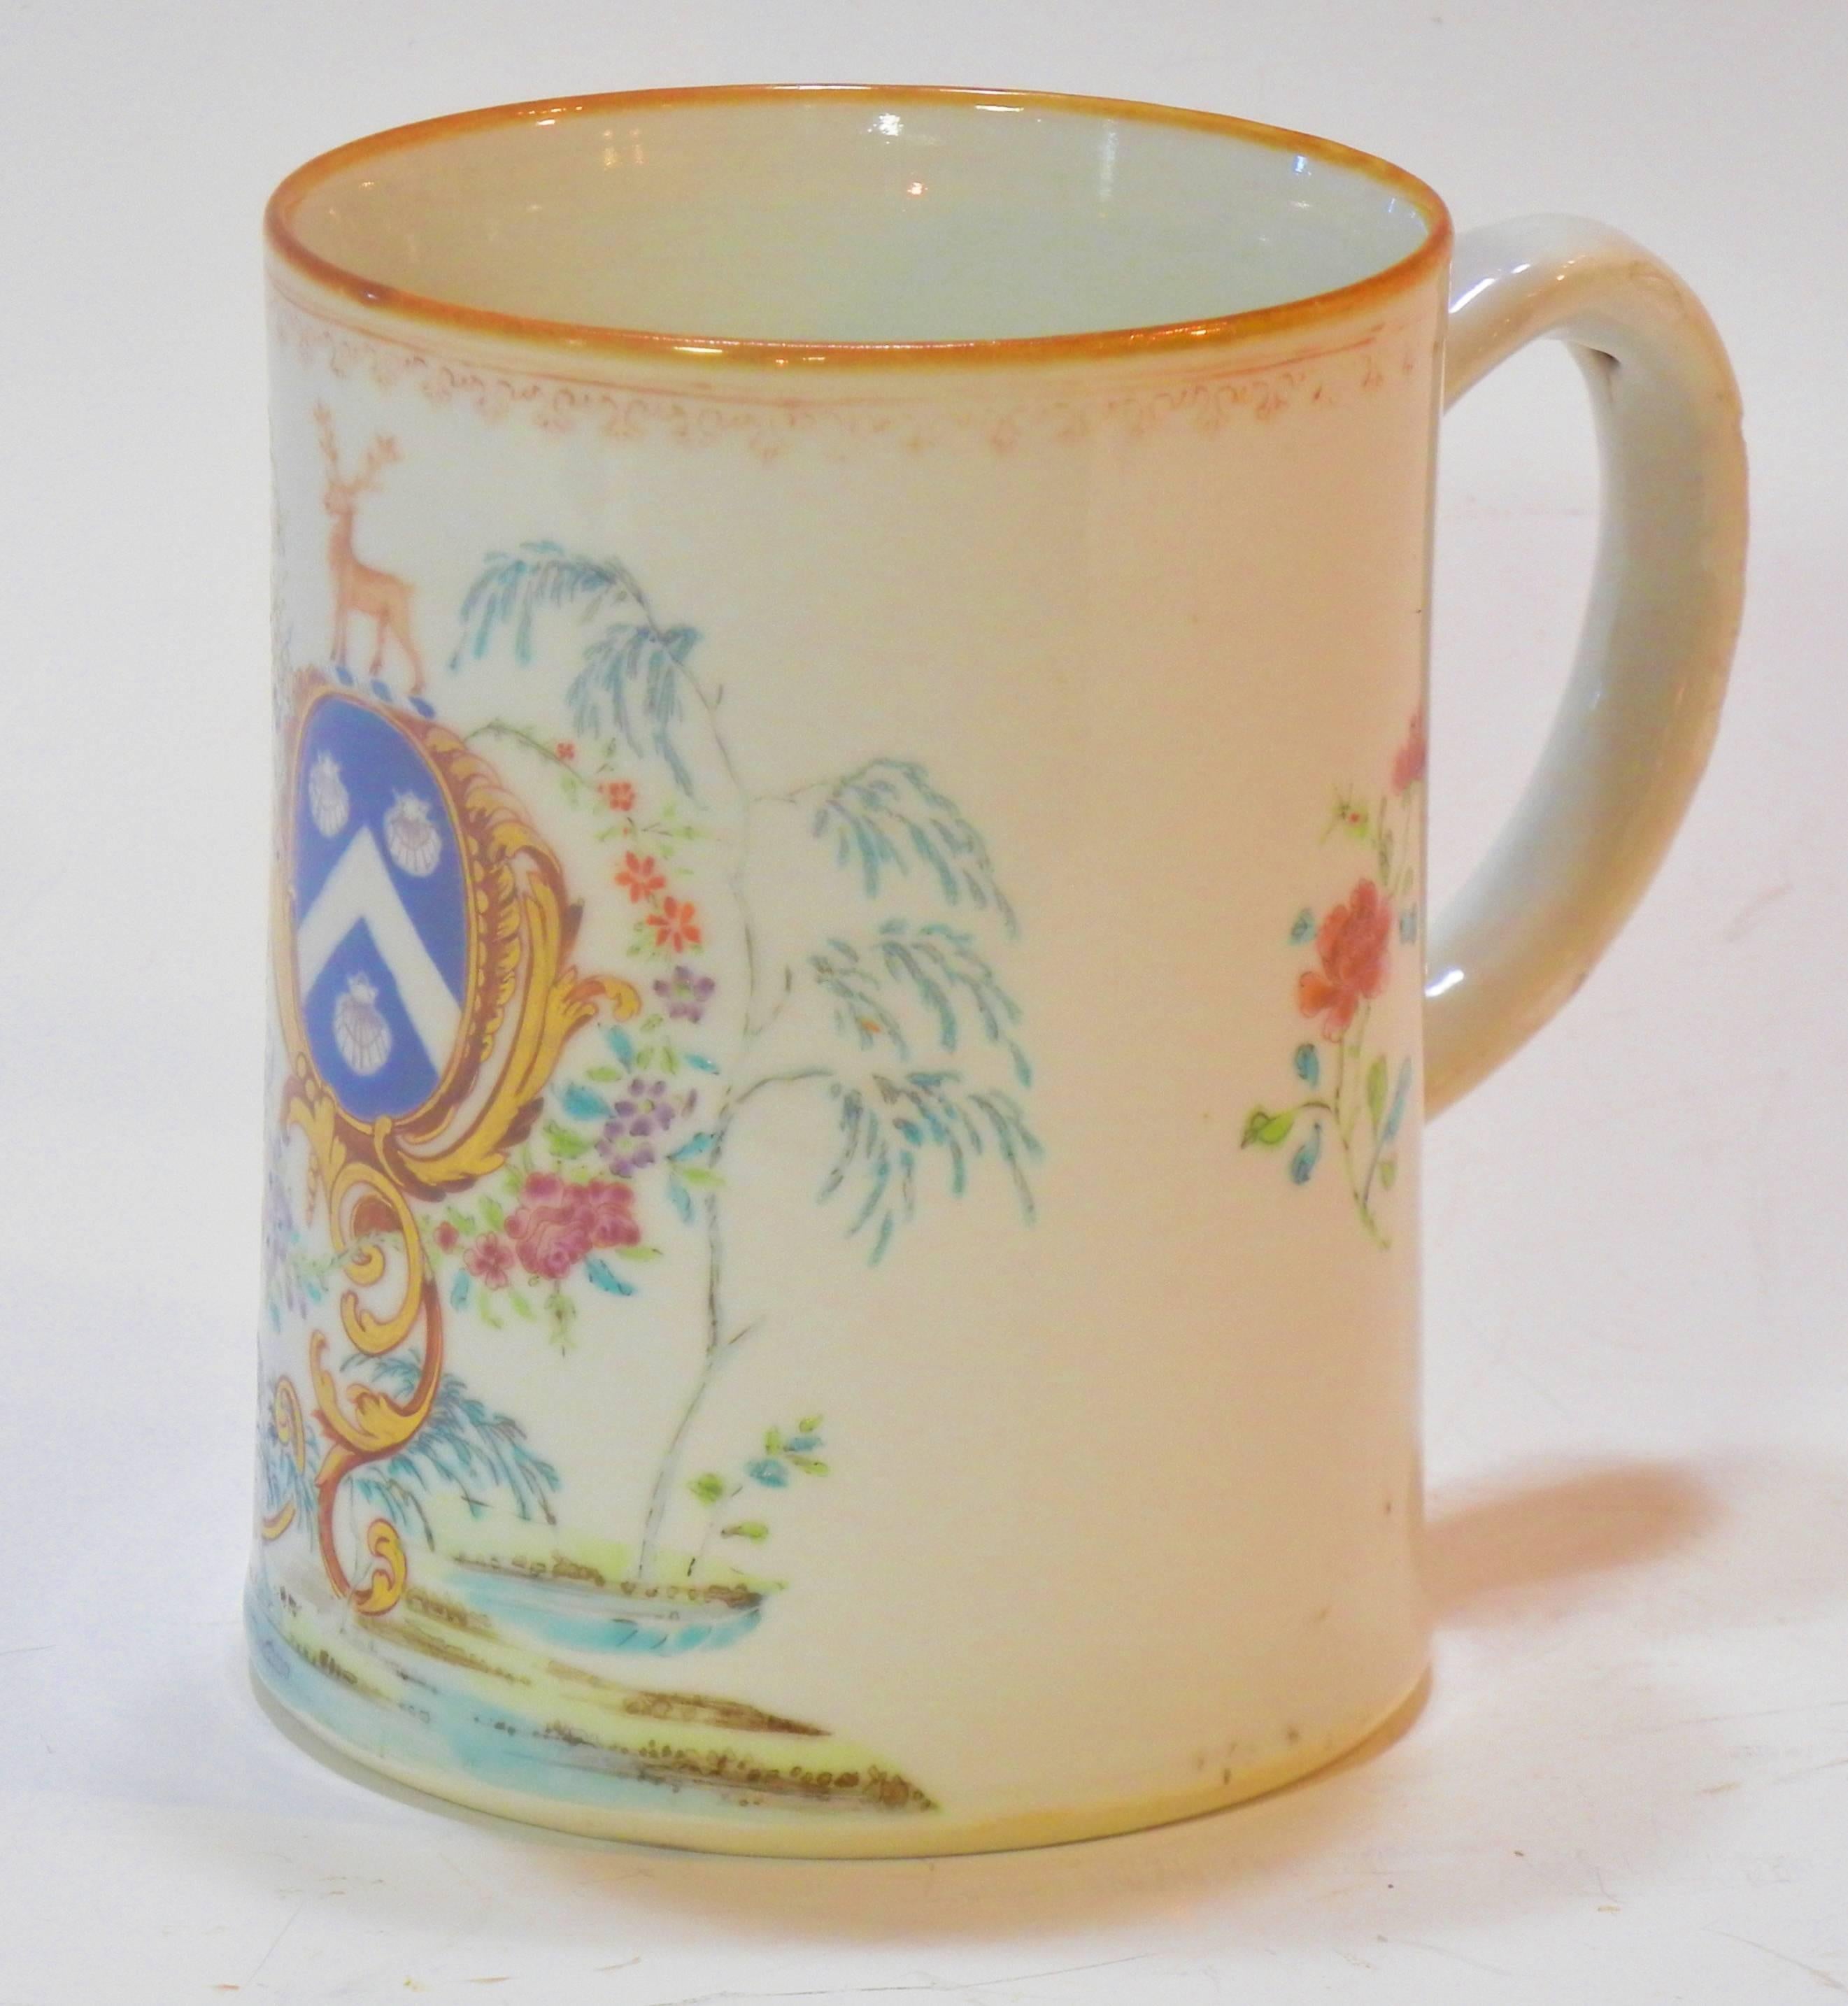 This hand-painted famille-rose and gold porcelain tankard has a Western armorial shield with three scallop shells of Saint-James around a white chevron on a blue field beneath a stag. The shield is mounted on and held erect by an elaborate gold